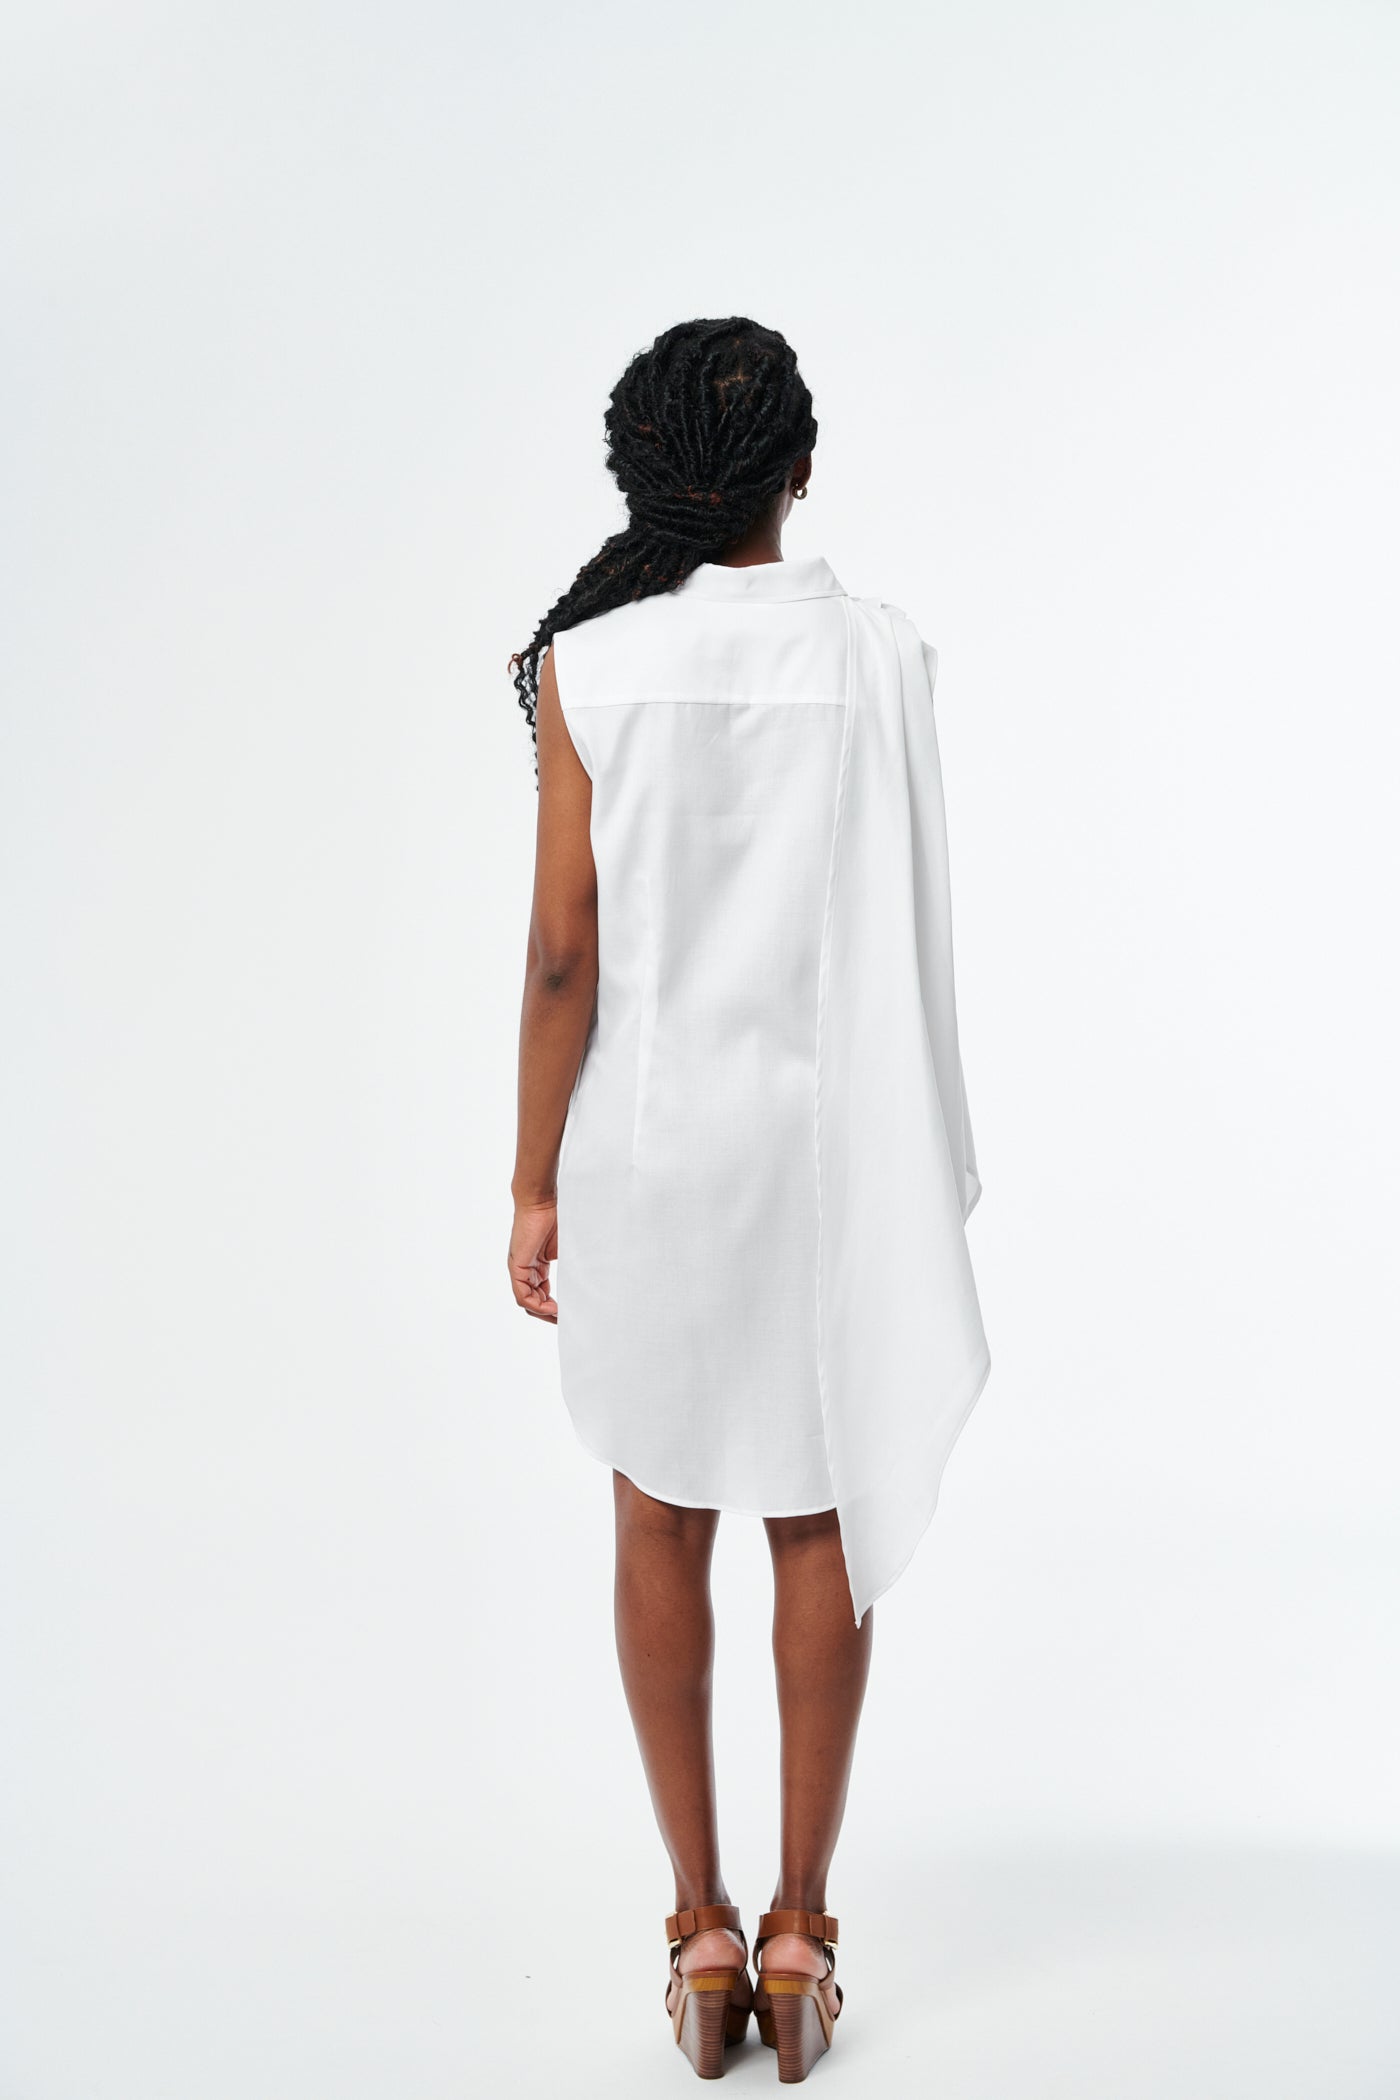 VESTIDO 2.0 Classic Shirt Dress with Removable Sleeves